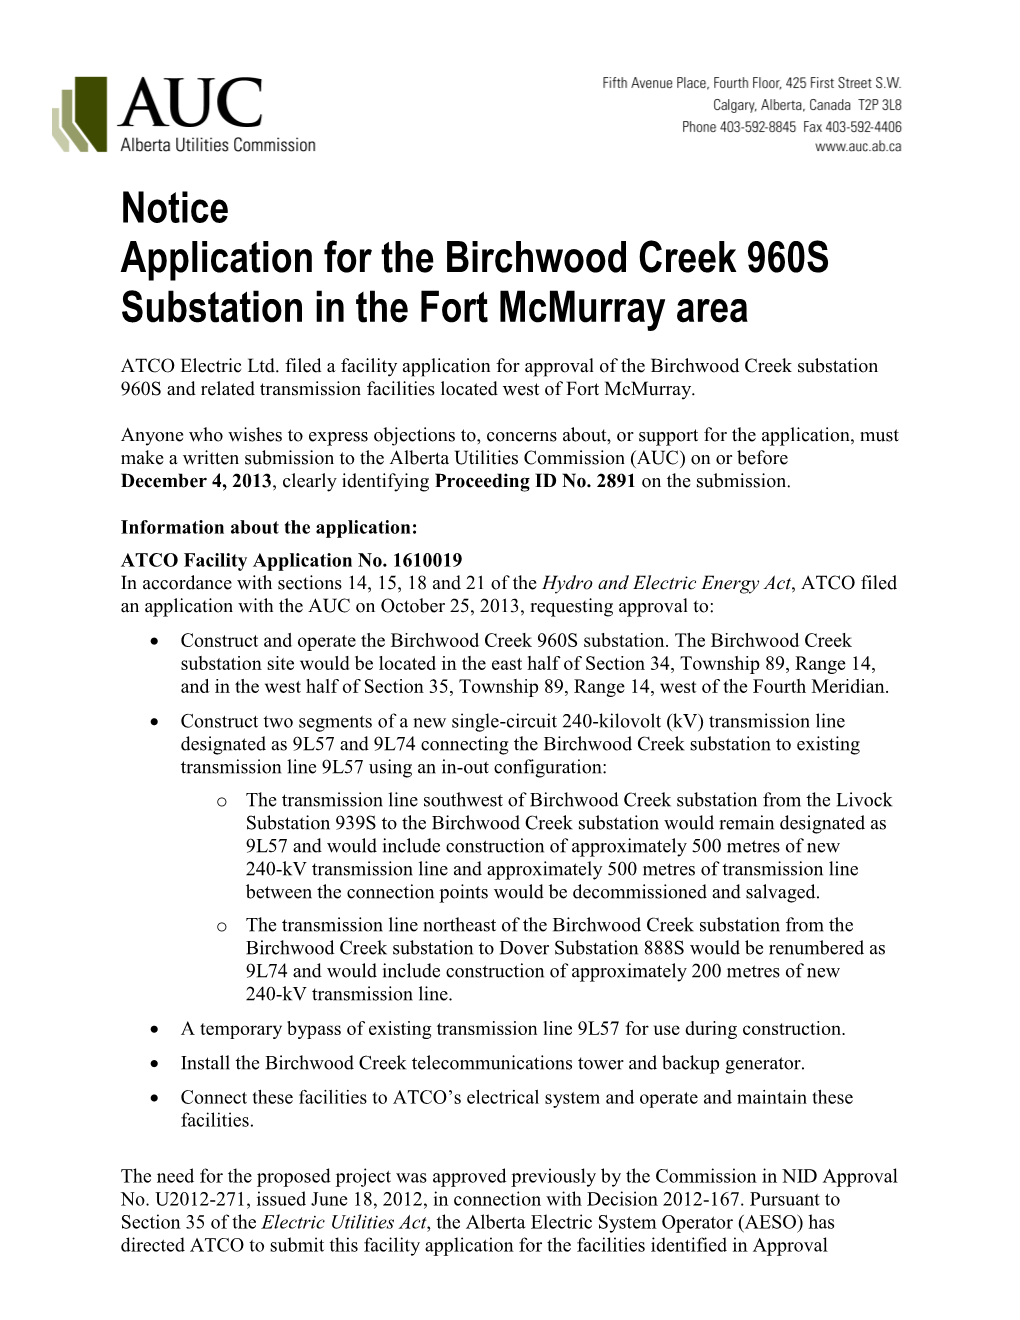 Notice Application for the Birchwood Creek 960S Substation in the Fort Mcmurray Area